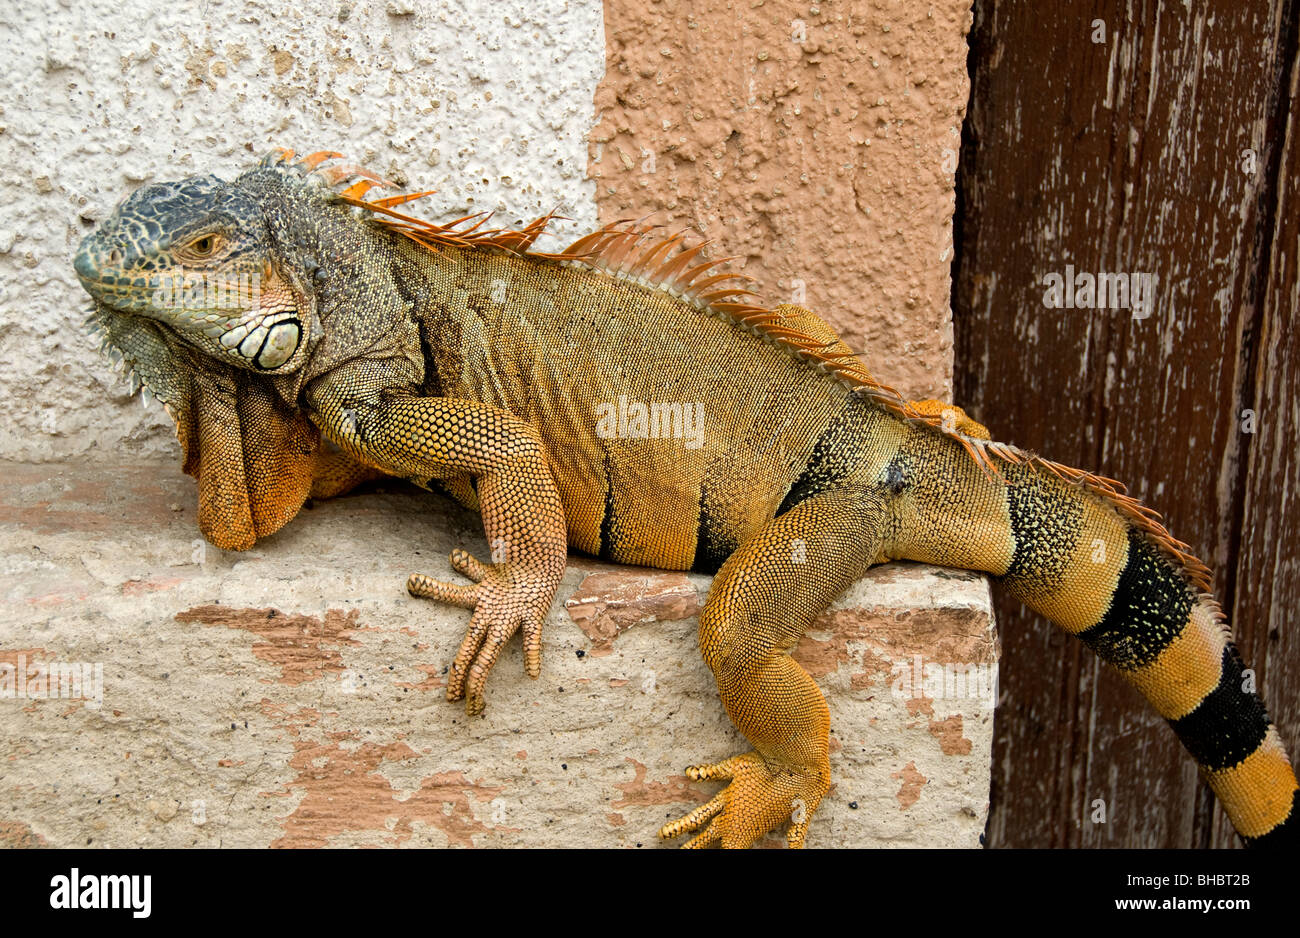 A Mexican iguana at rest Stock Photo